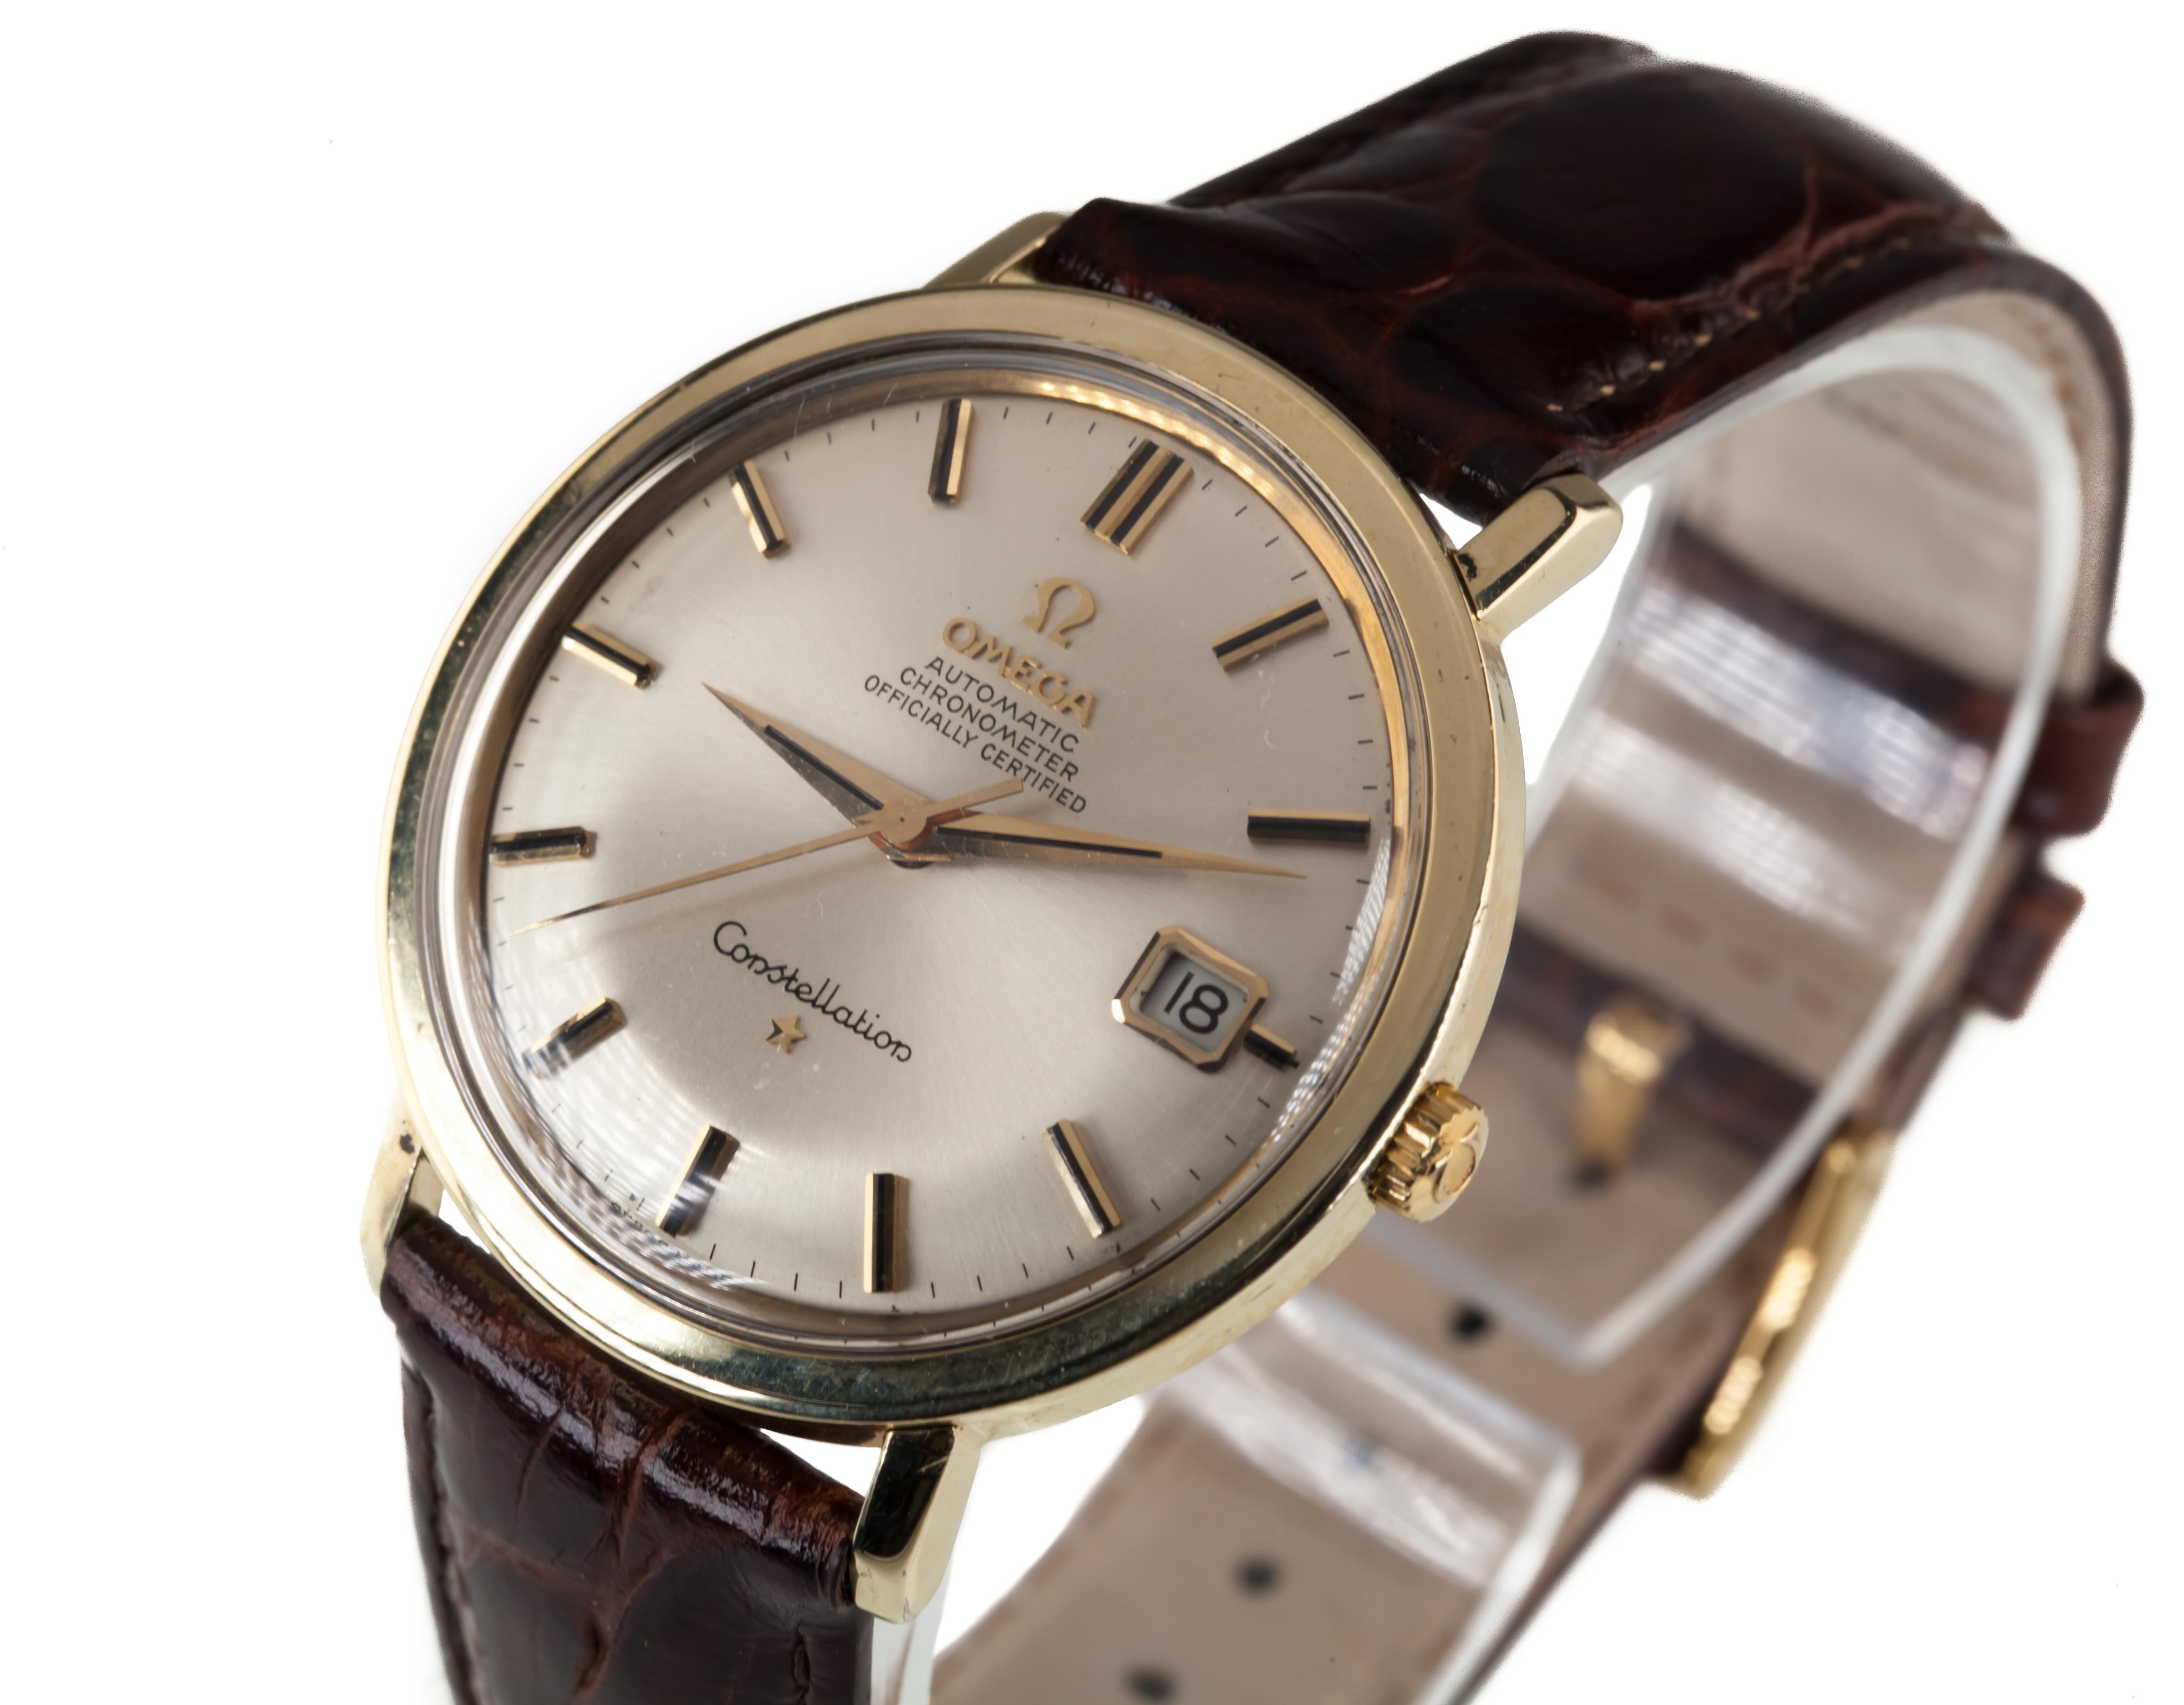 Omega Ω Men's Gold-Plated Constellation Chronometer Automatic Watch 168.004

Movement #561
Movement Serial #244611XX
Case #CD 168.004 (Officially Certified)
Year: 1966

Gold-Plated Round Case
35 mm in Diameter (37 mm w/ Crown)
Lug-to-Lug Distance =